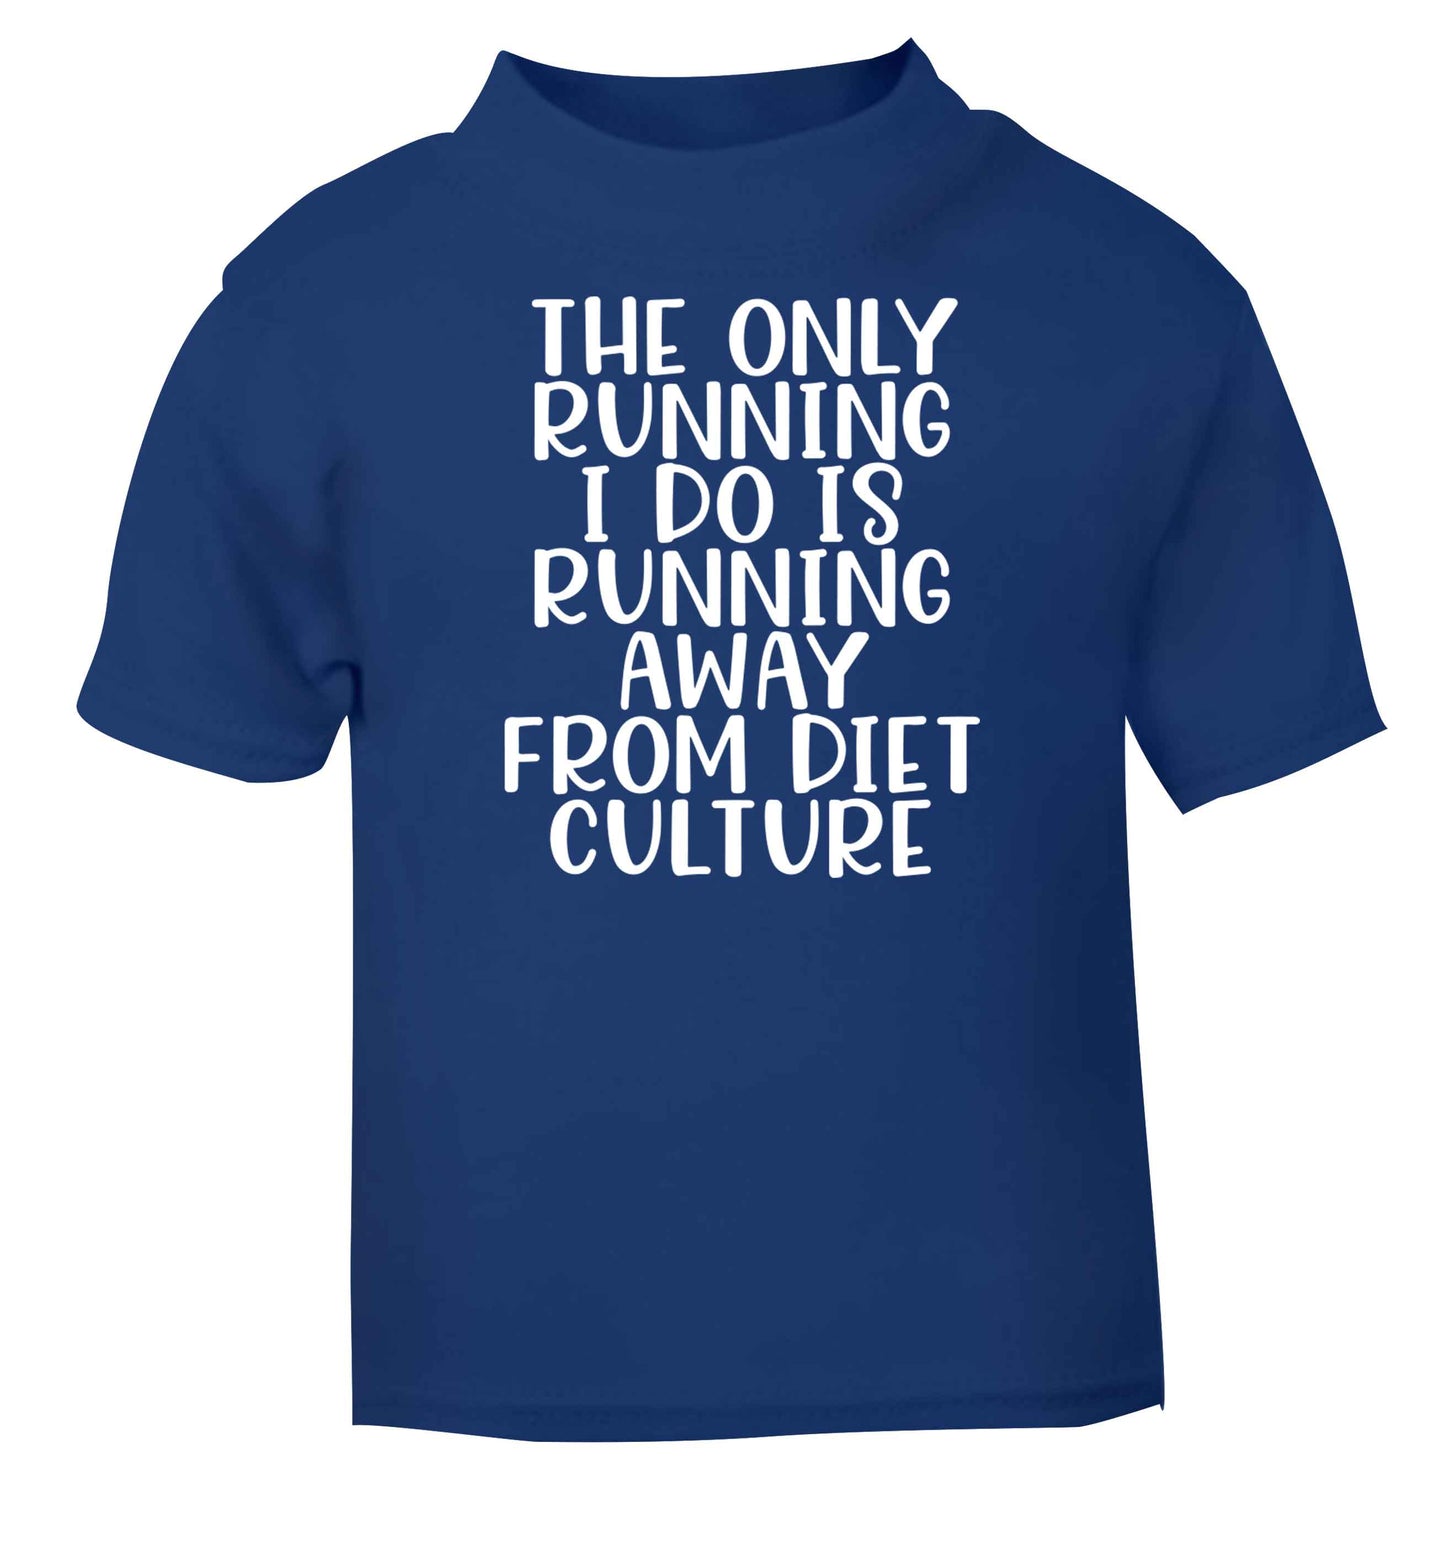 The only running I do is running away from diet culture blue baby toddler Tshirt 2 Years